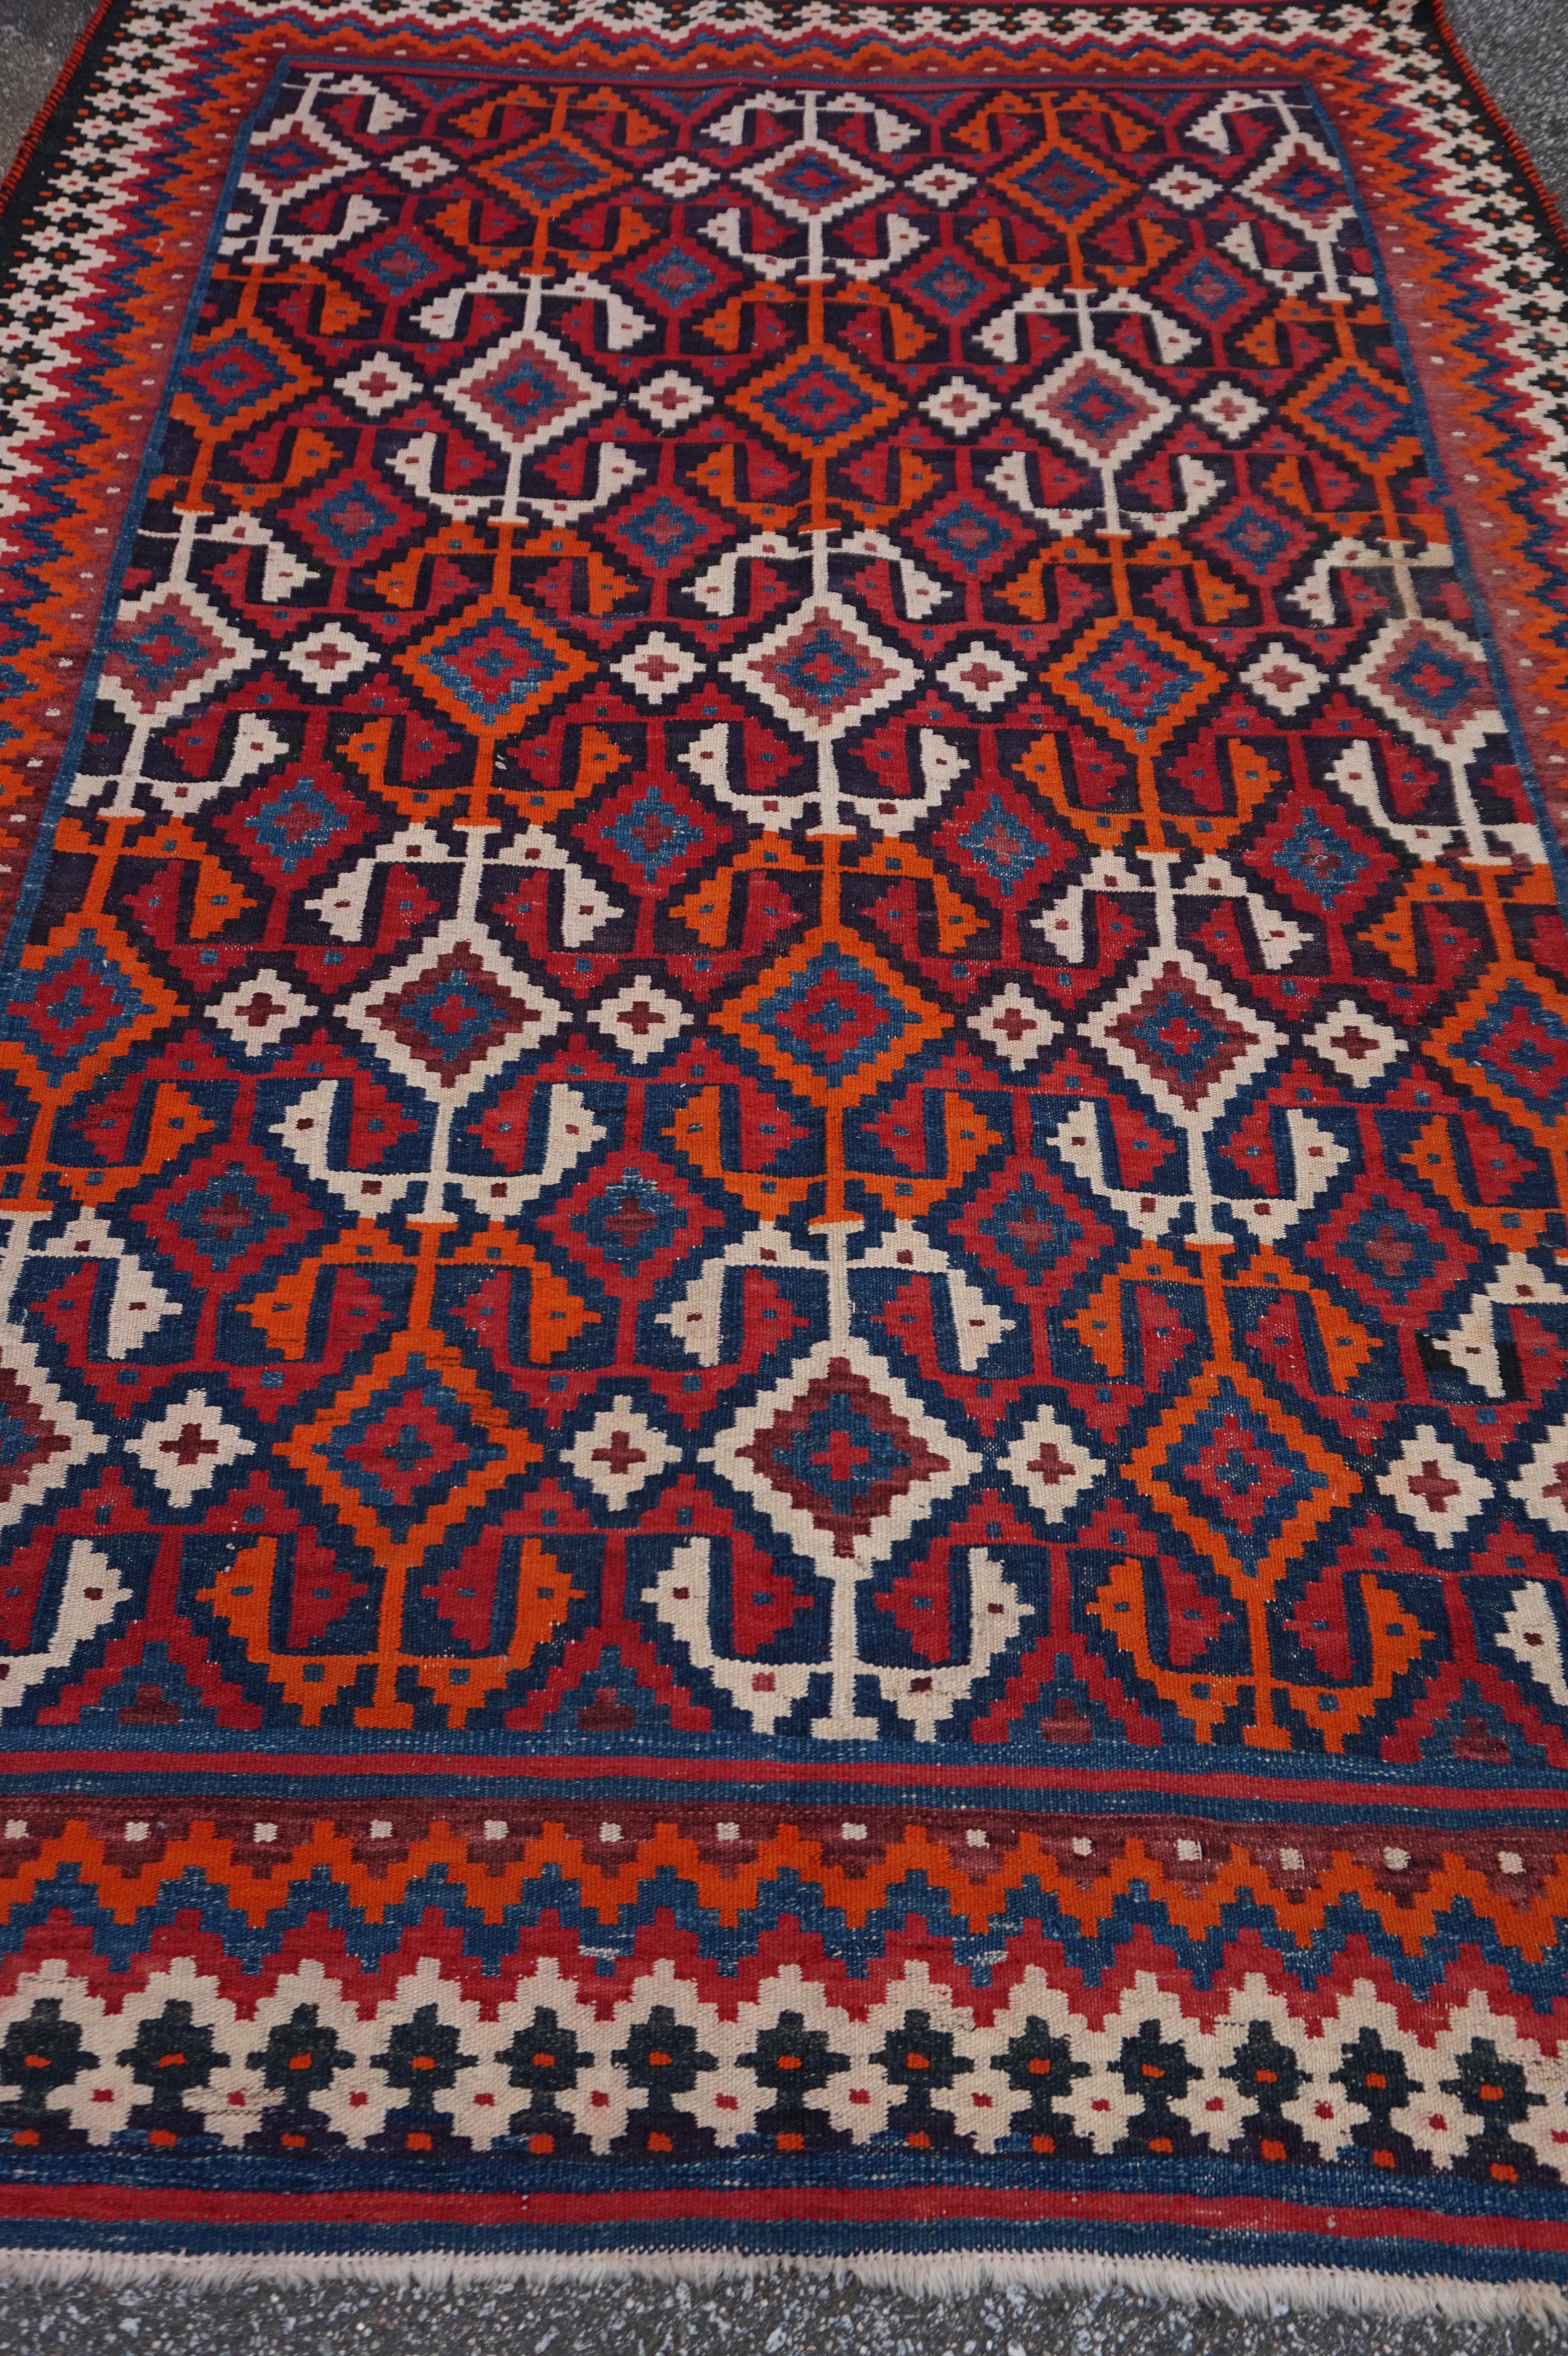 Finely hand-knotted Anatolian kilim with excellent geometric pattern. Lovely alternating medallions and warm orange, indigo and blue tones. This is a refined semi-antique flat-weave the likes of which are not easily seen but much emulated. It is